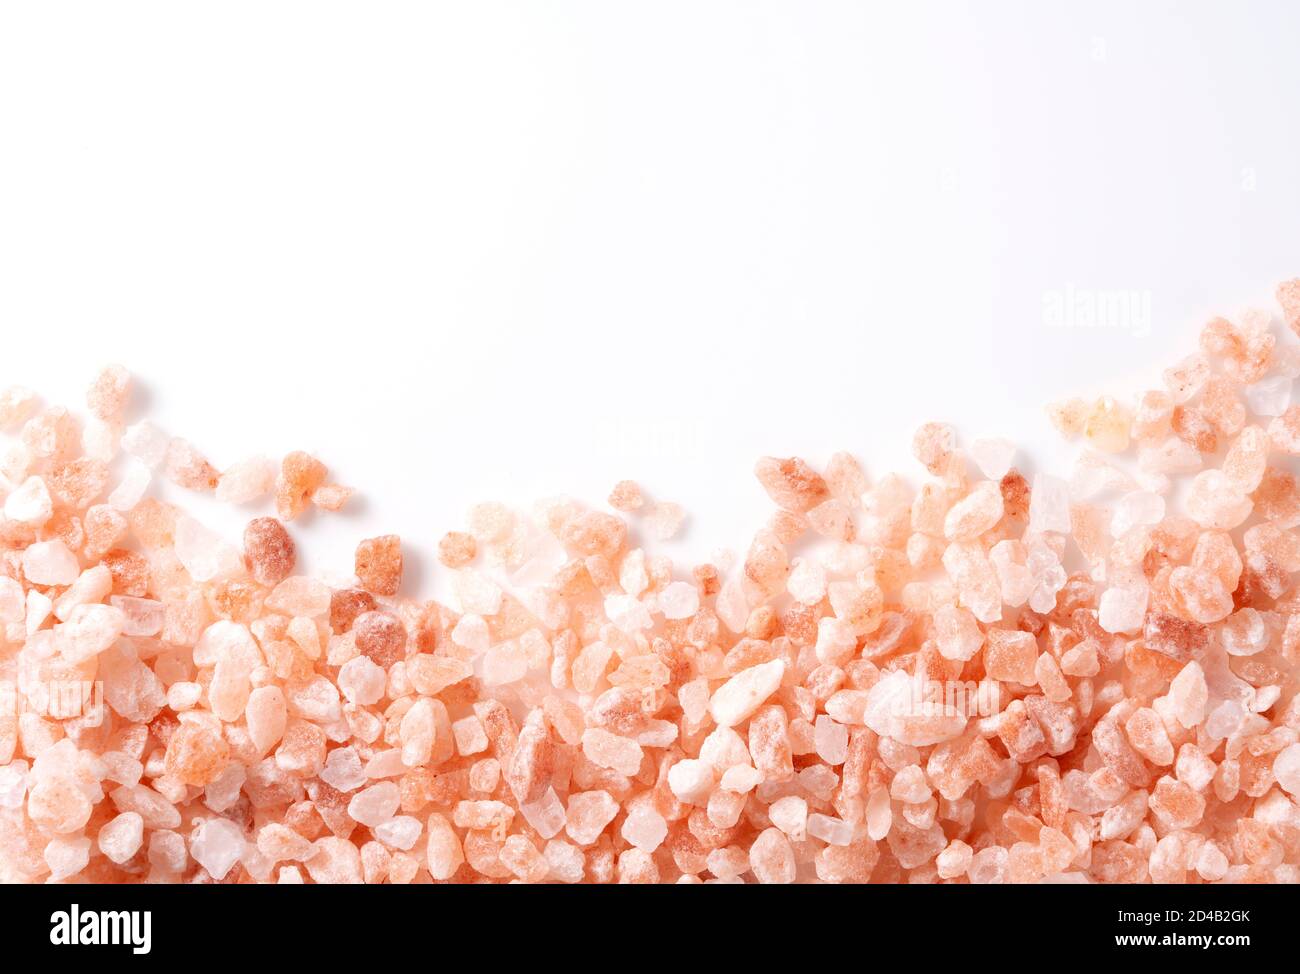 Take a bird's eye view of rock salt placed on a white background with copy space Stock Photo